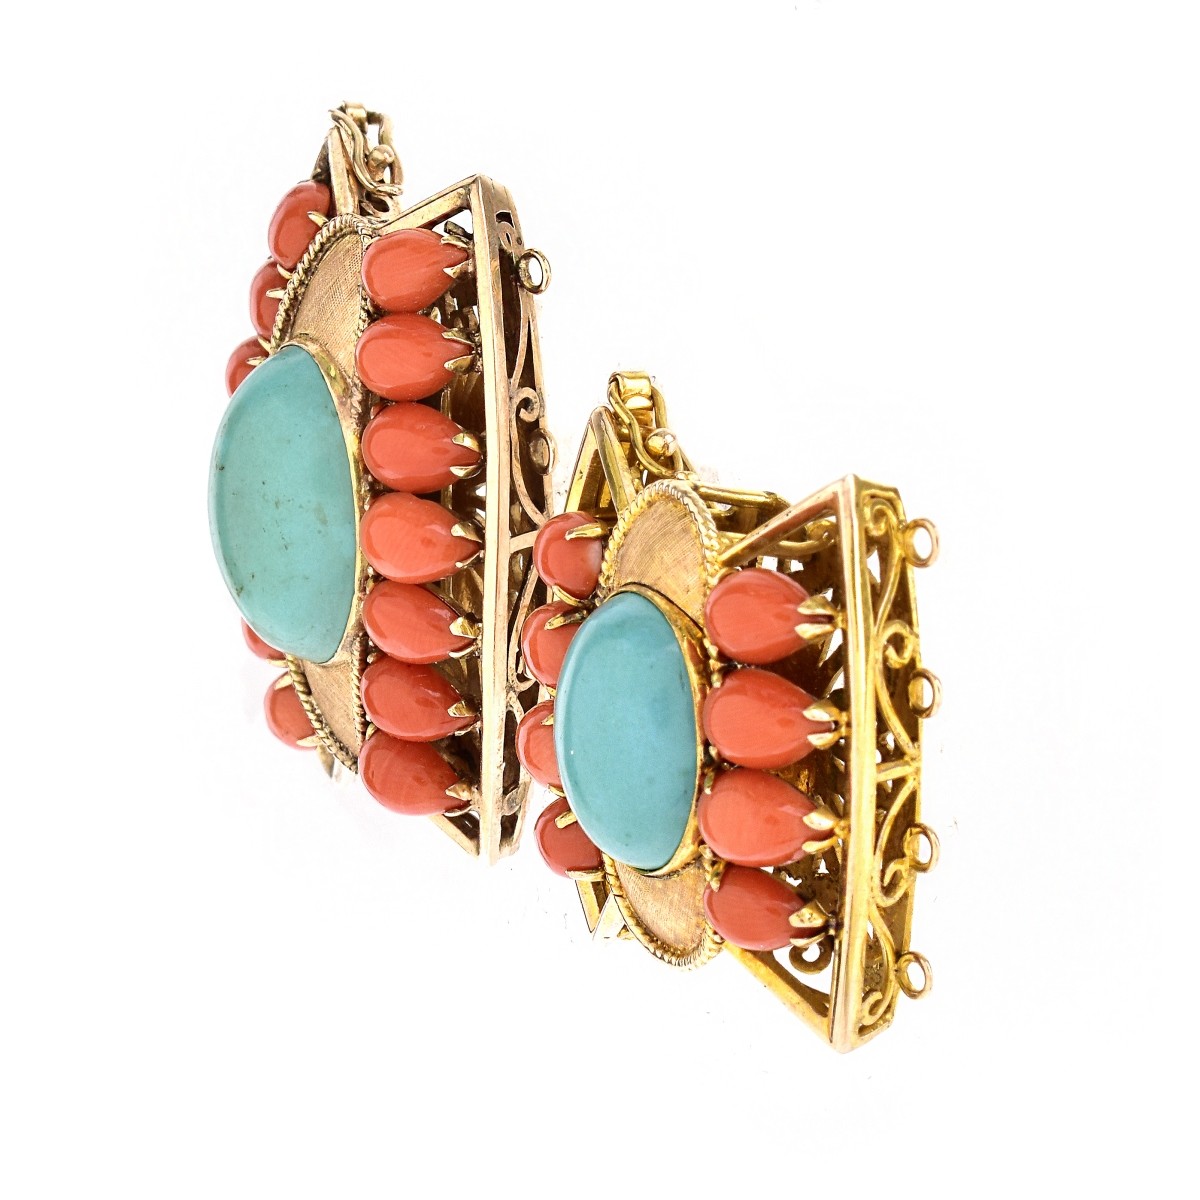 Two (2) Coral, Turquoise and 14K Gold Clasps